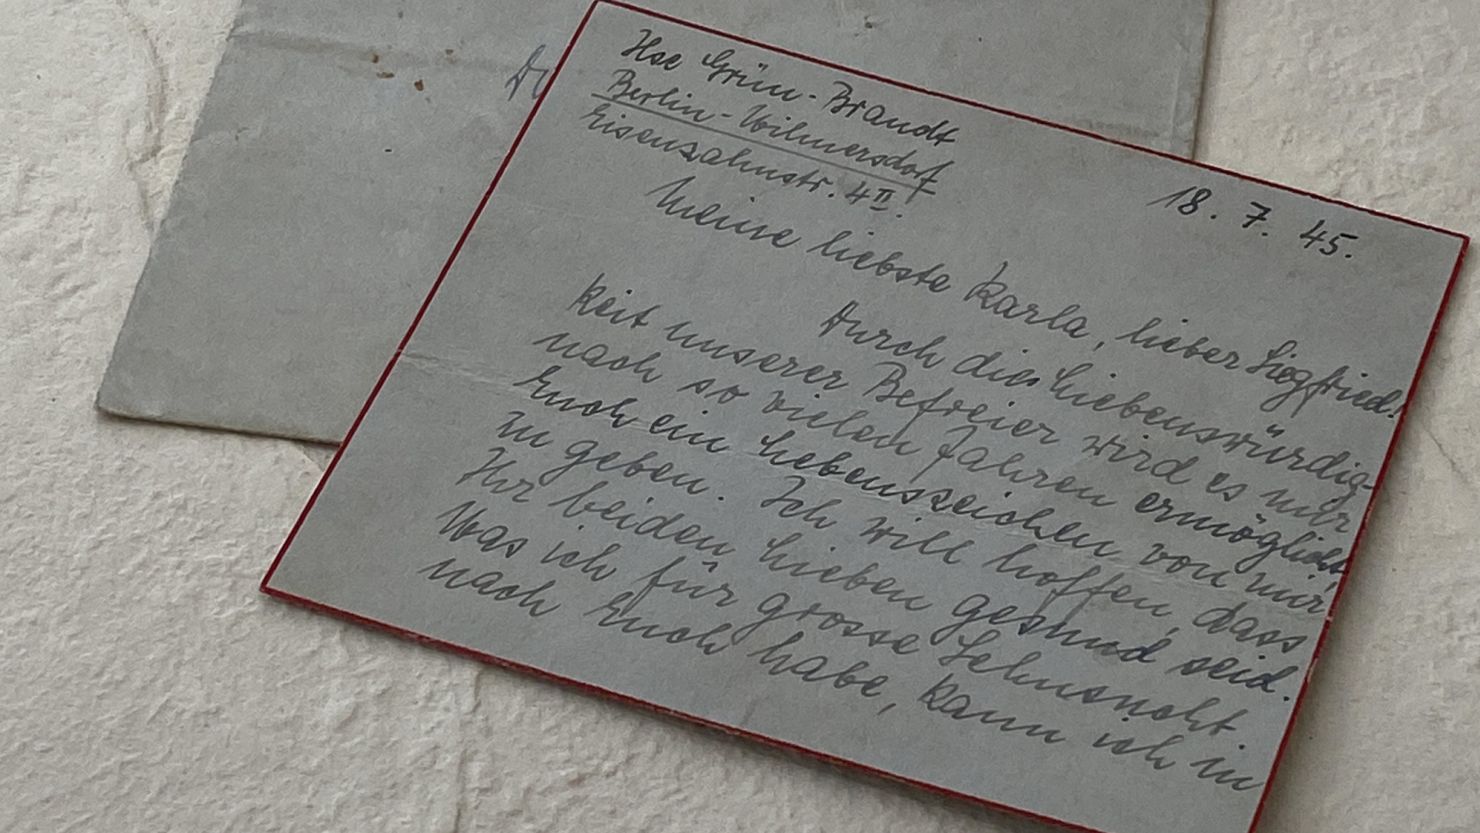 Ilse Loewenberg addressed this letter to her sister Carla in 1945.